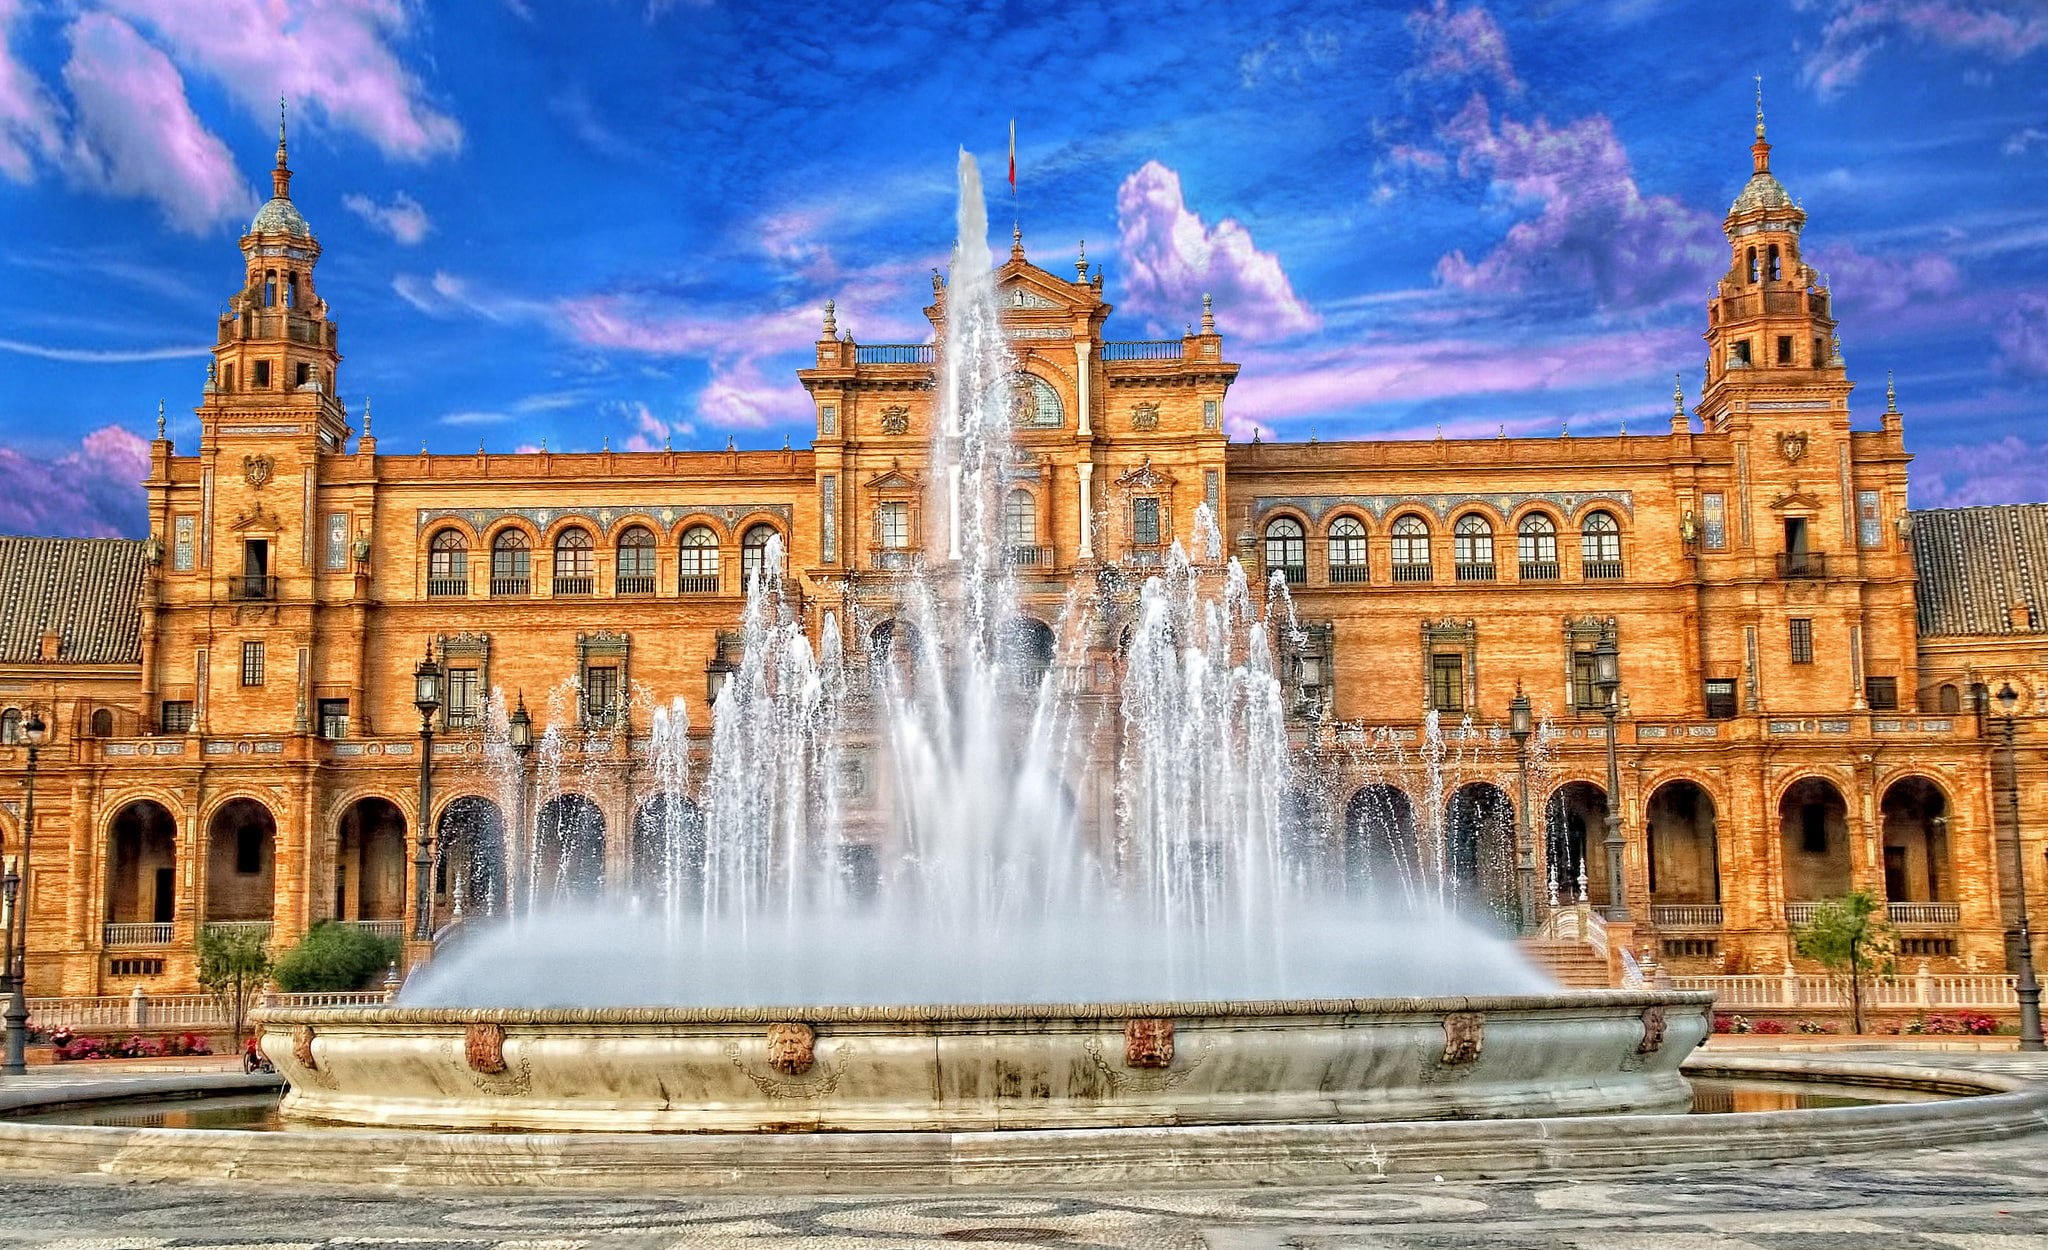 brown cathedral, the sky, fountain, Spain, Palace, Seville, Espana